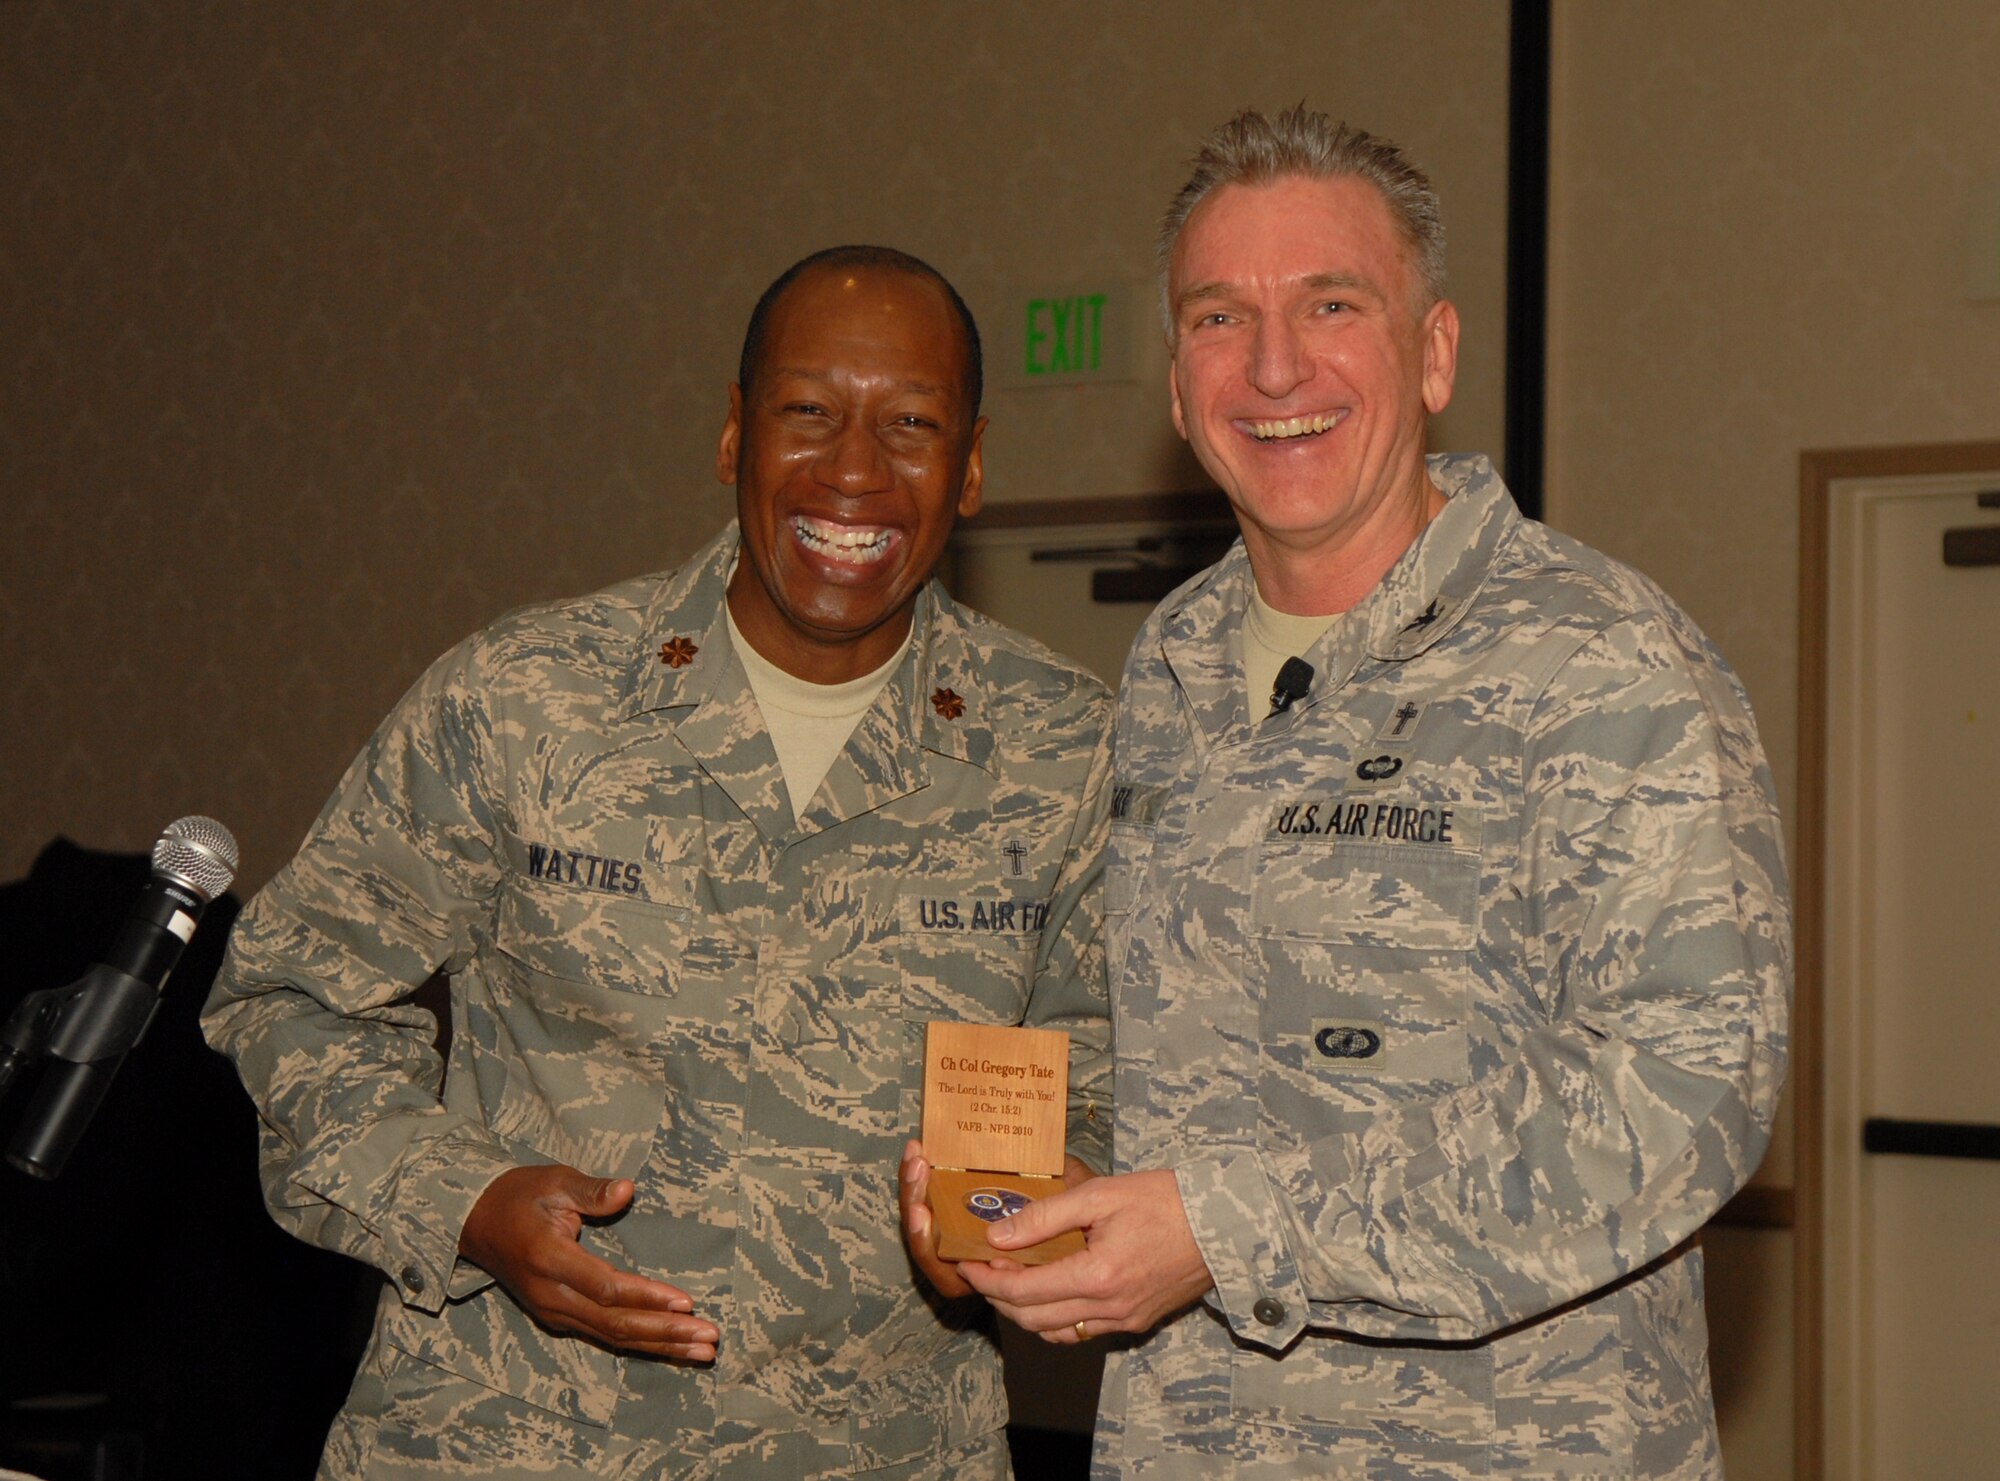 VANDENBERG AIR FORCE BASE, Calif. -- Chaplain (Maj.) Warren Watties, the 30th Space Wing chaplain presents Chaplain (Col.) Gregory Tate, the Air Force Space Command chaplain with a Vandenberg chaplain coin as a token of appreciation for being the guest speaker during the National Prayer Breakfast at the Pacific Coast Club here Tuesday, Jan. 25, 2010. The breakfast is held annually to unite multiple religions in prayer for the U.S.(U.S. Air Force photo/Airman 1st Class Kerelin Molina)